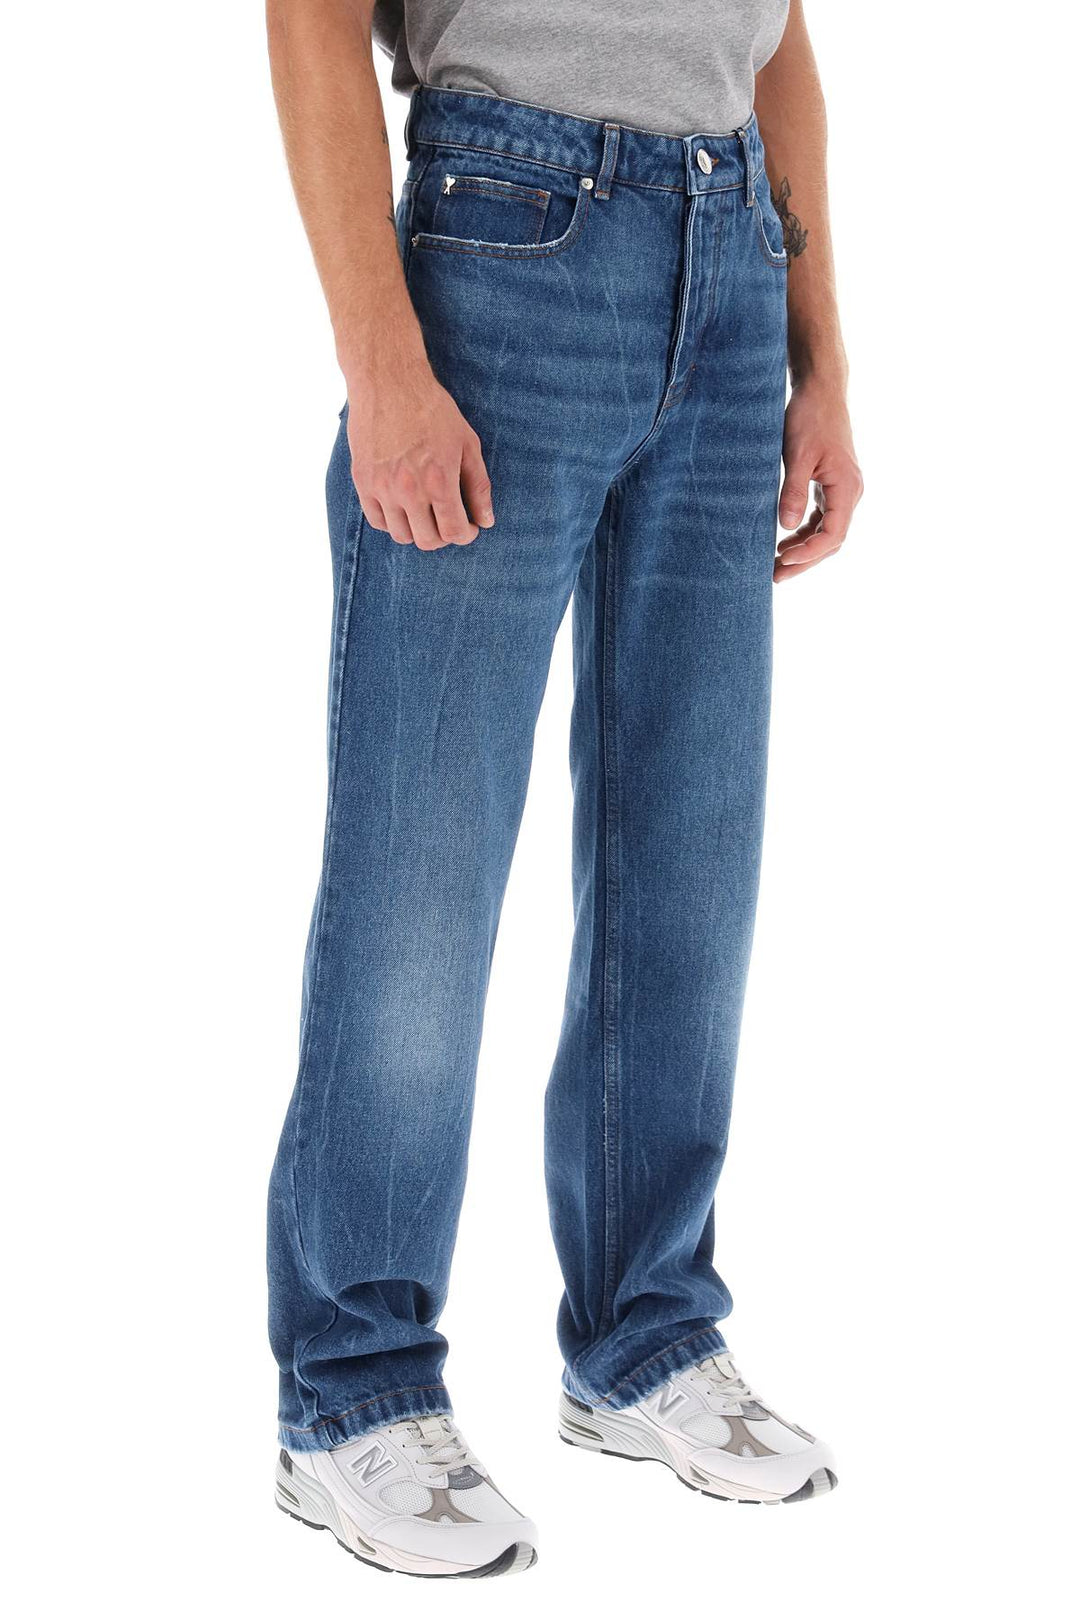 Ami Alexandre Matiussi Loose Jeans With Straight Cut   Blu